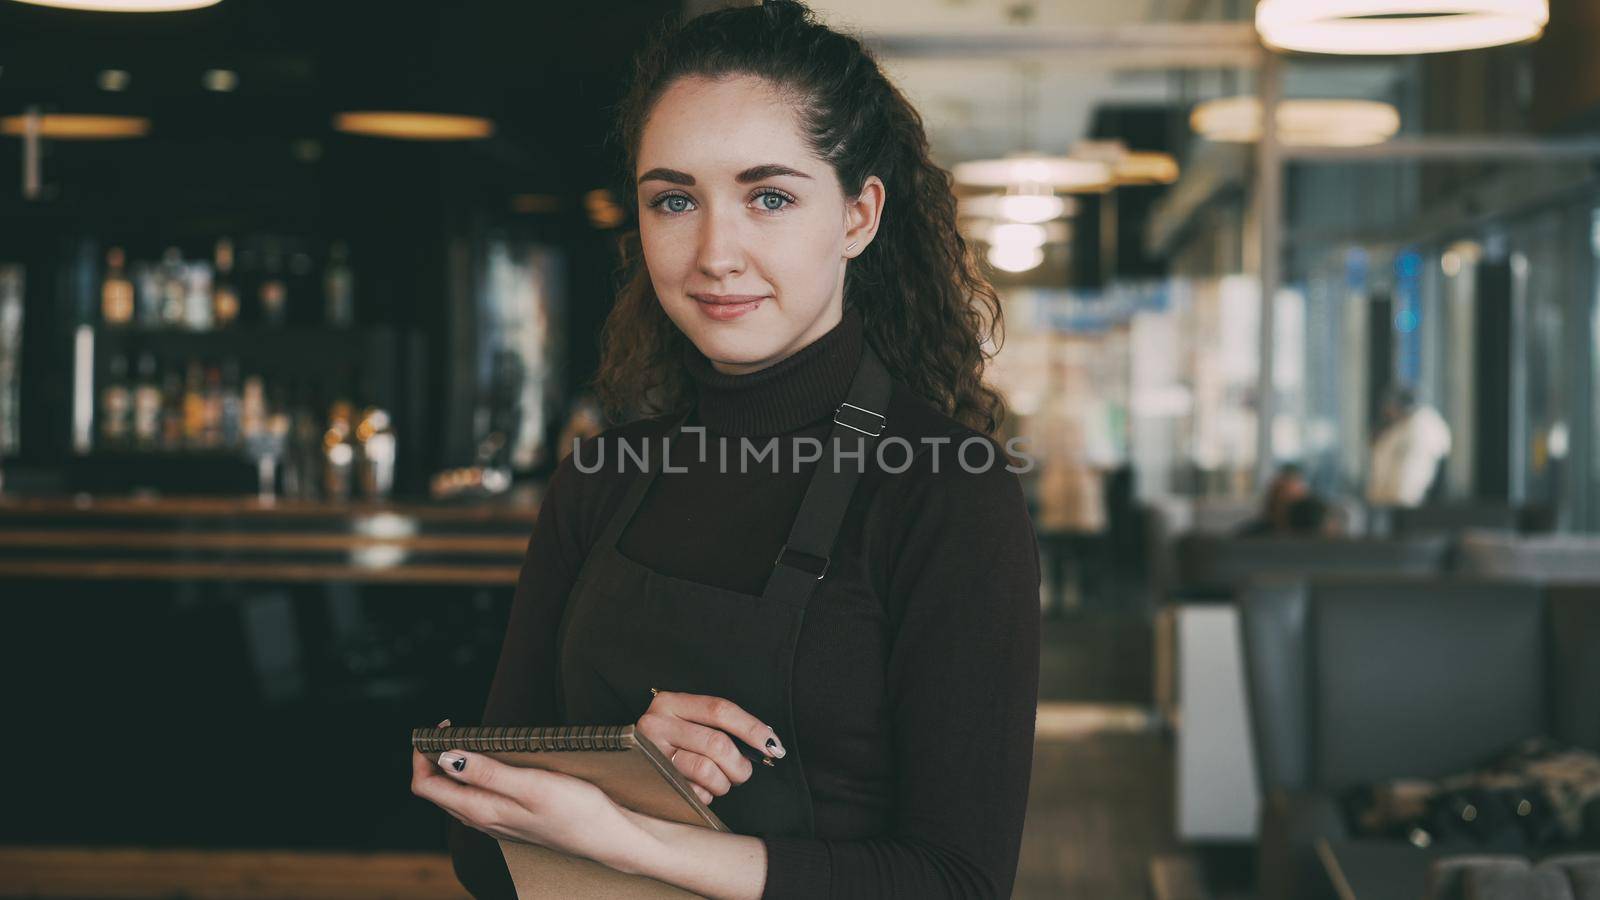 Portrait of cheerful and beautiful young waitress standing, keeping menu, and smiling sincerely in slylish cafe. Bar counter with many hard and soft drinks is in the background